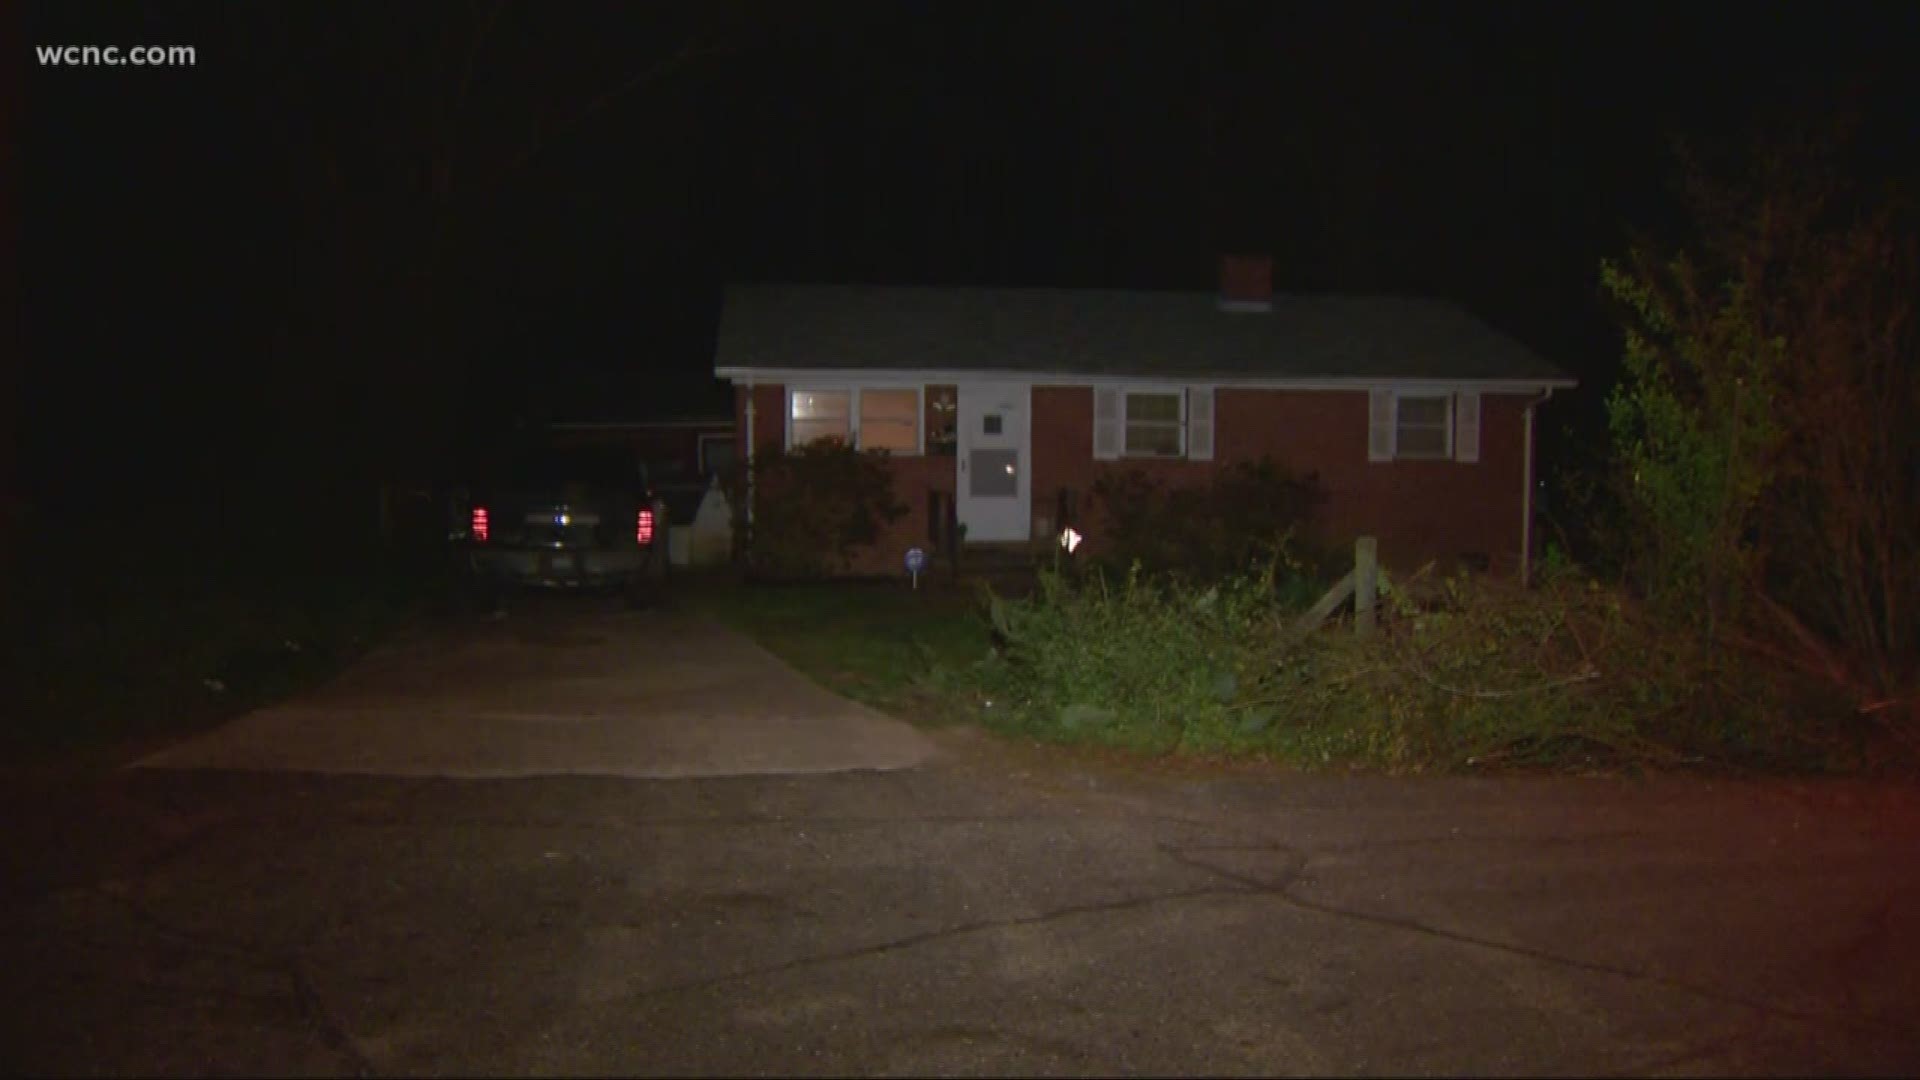 Police are investigating a double homicide in Gastonia Wednesday night.